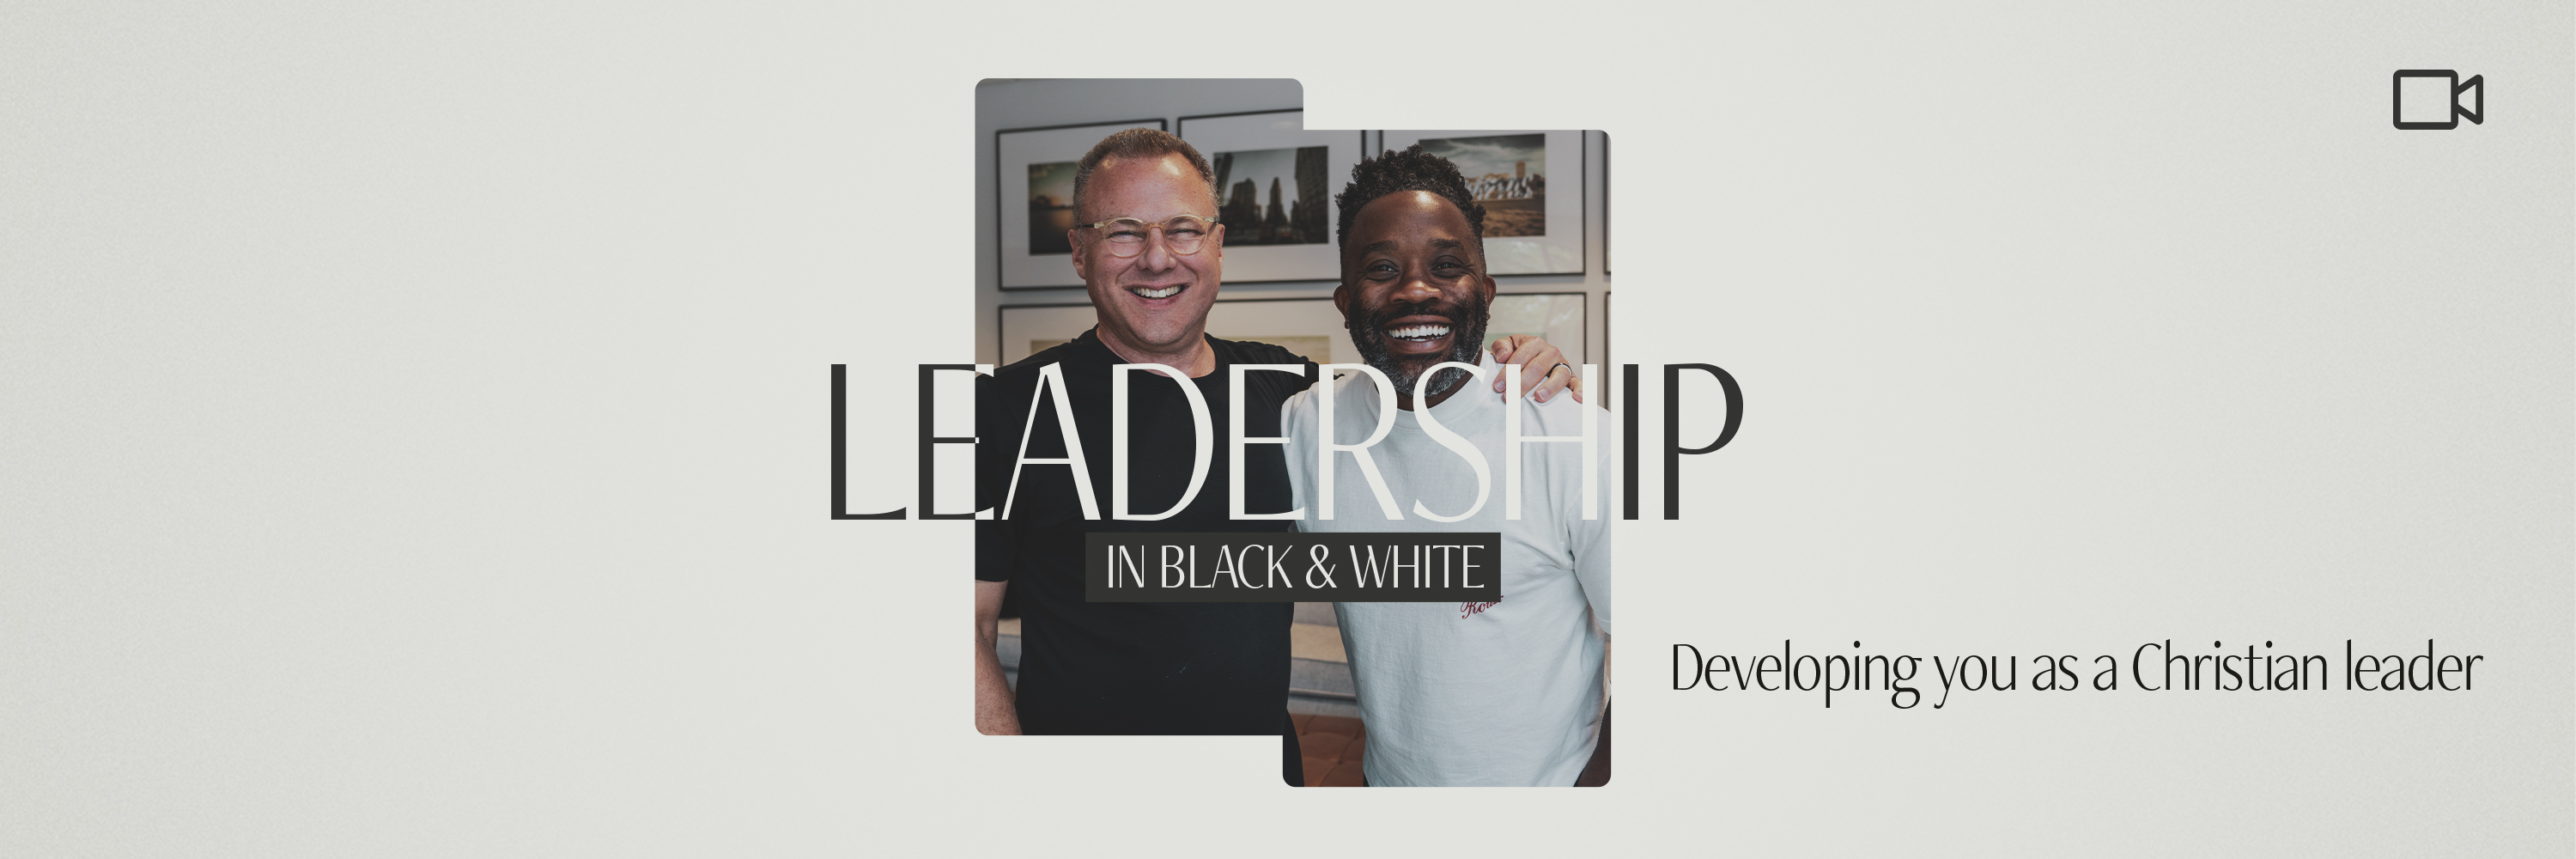 Leadership in Black and White 2.0 VIDEO